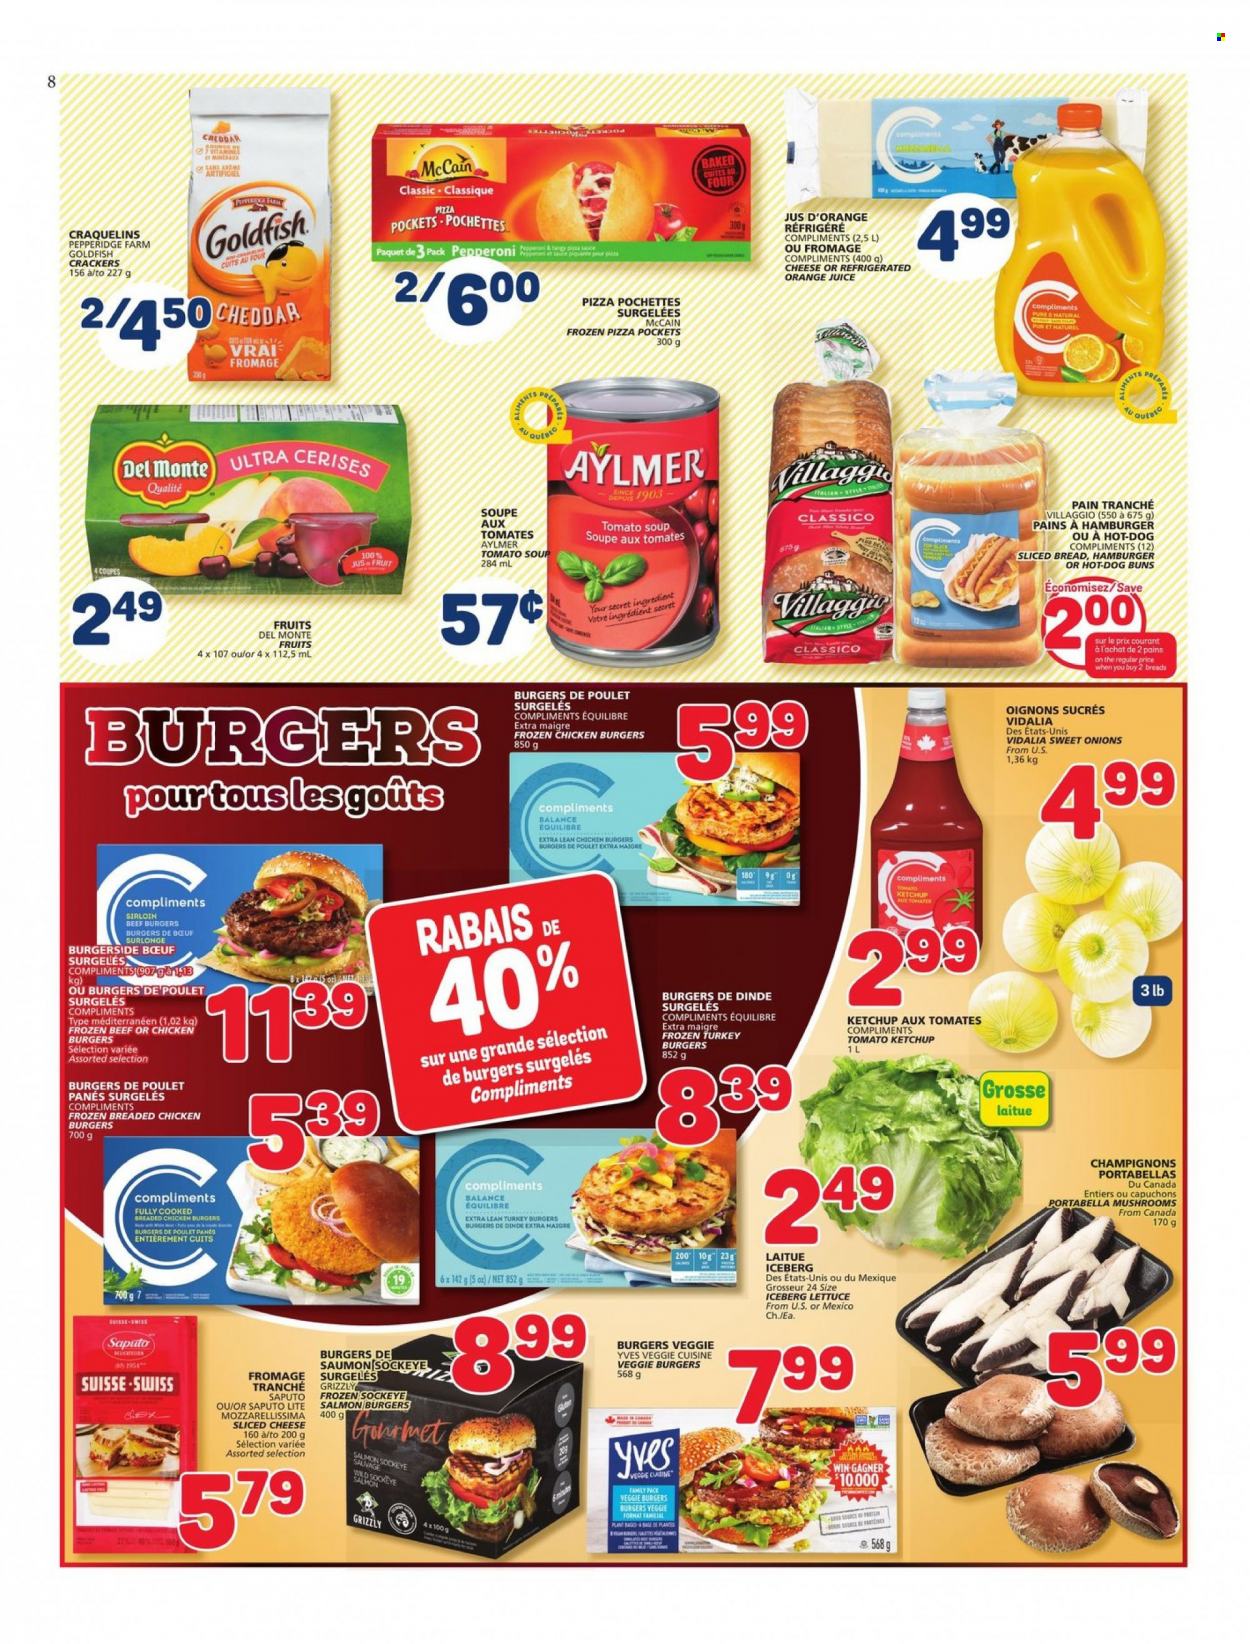 thumbnail - Marché Bonichoix Flyer - May 12, 2022 - May 18, 2022 - Sales products - buns, lettuce, salmon, tomato soup, pizza, soup, fried chicken, veggie burger, beef burger, pepperoni, sliced cheese, McCain, crackers, Goldfish, Classico, orange juice, juice, whole turkey, chicken, turkey, turkey burger, ketchup. Page 8.